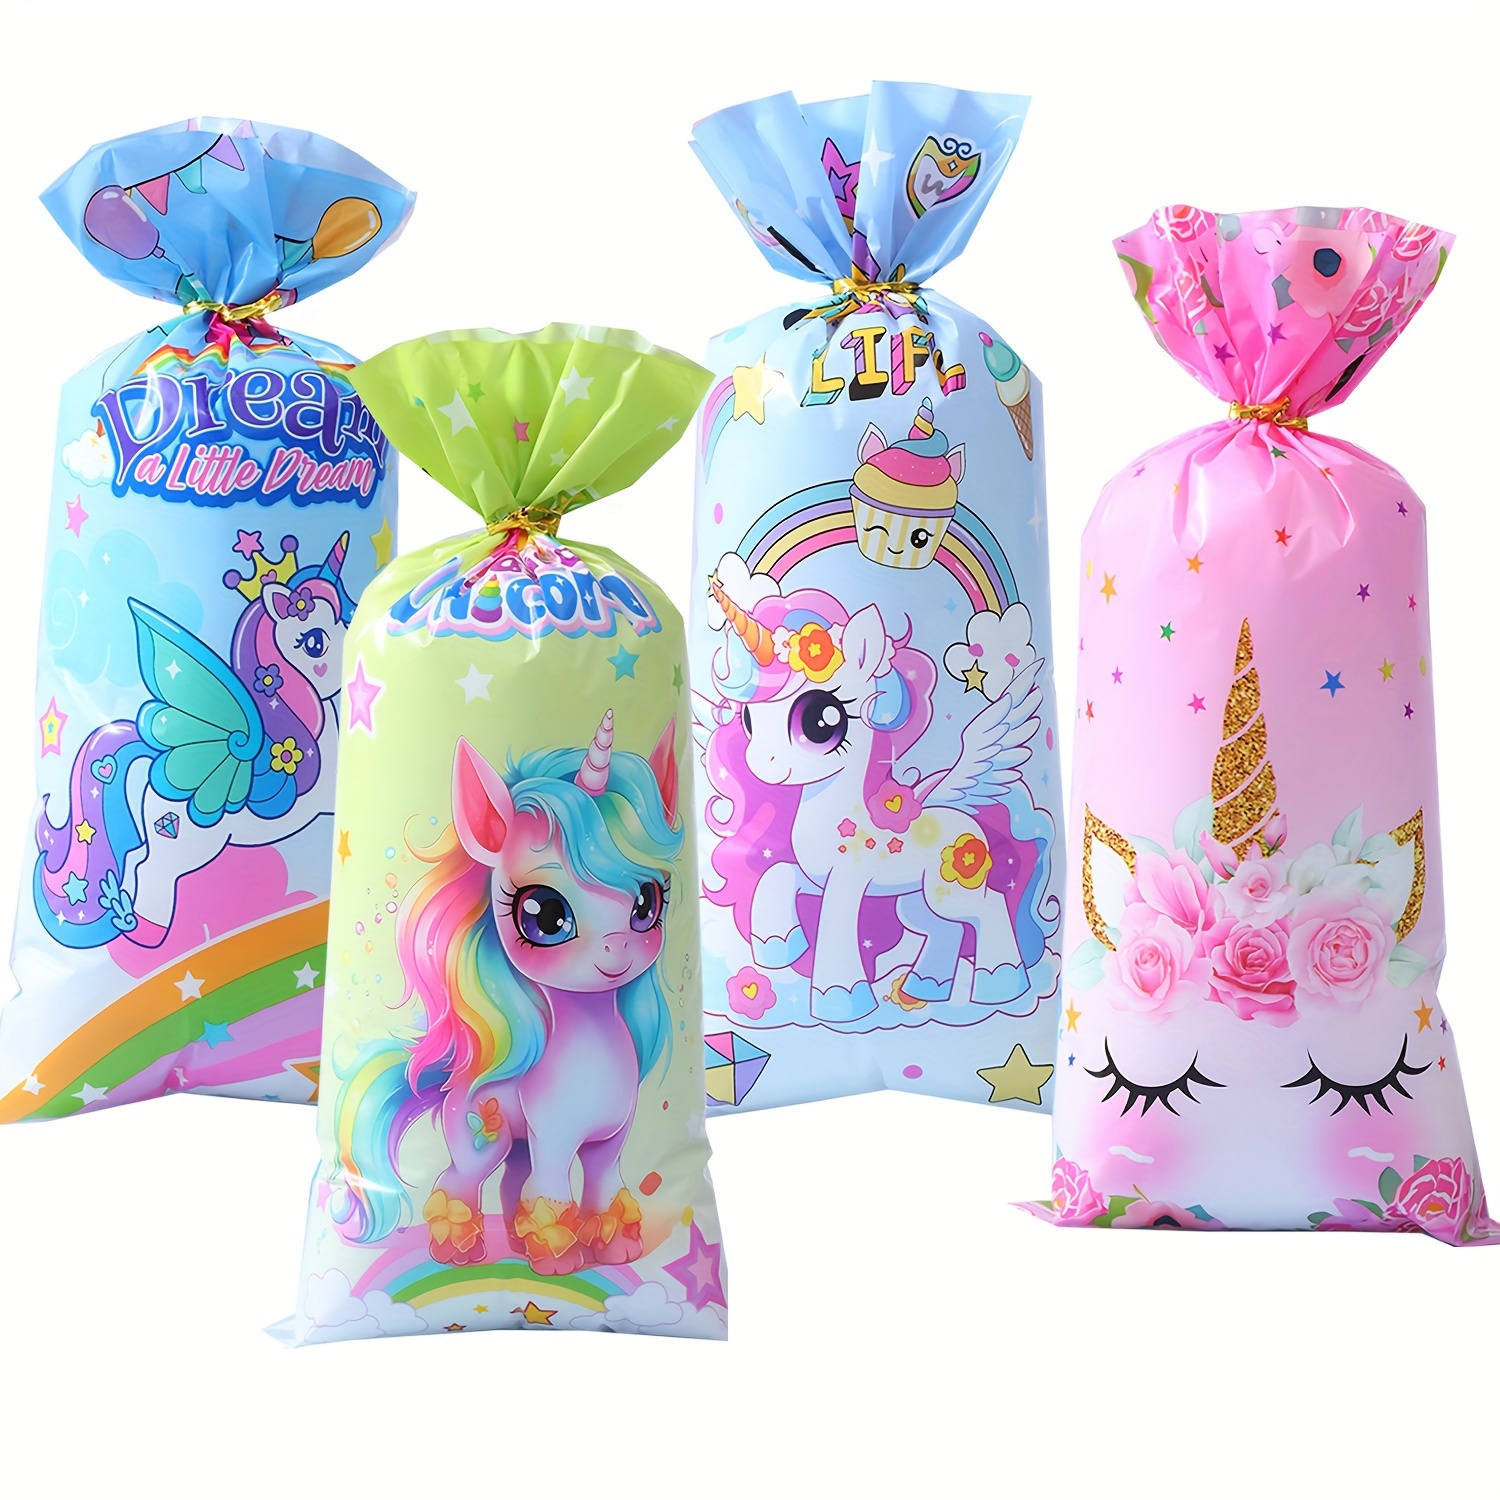 

50-piece Party Favor Bags, 12.5x27.5cm - Cartoon-themed Candy & Gift Bags With Ribbons For Birthday Celebrations